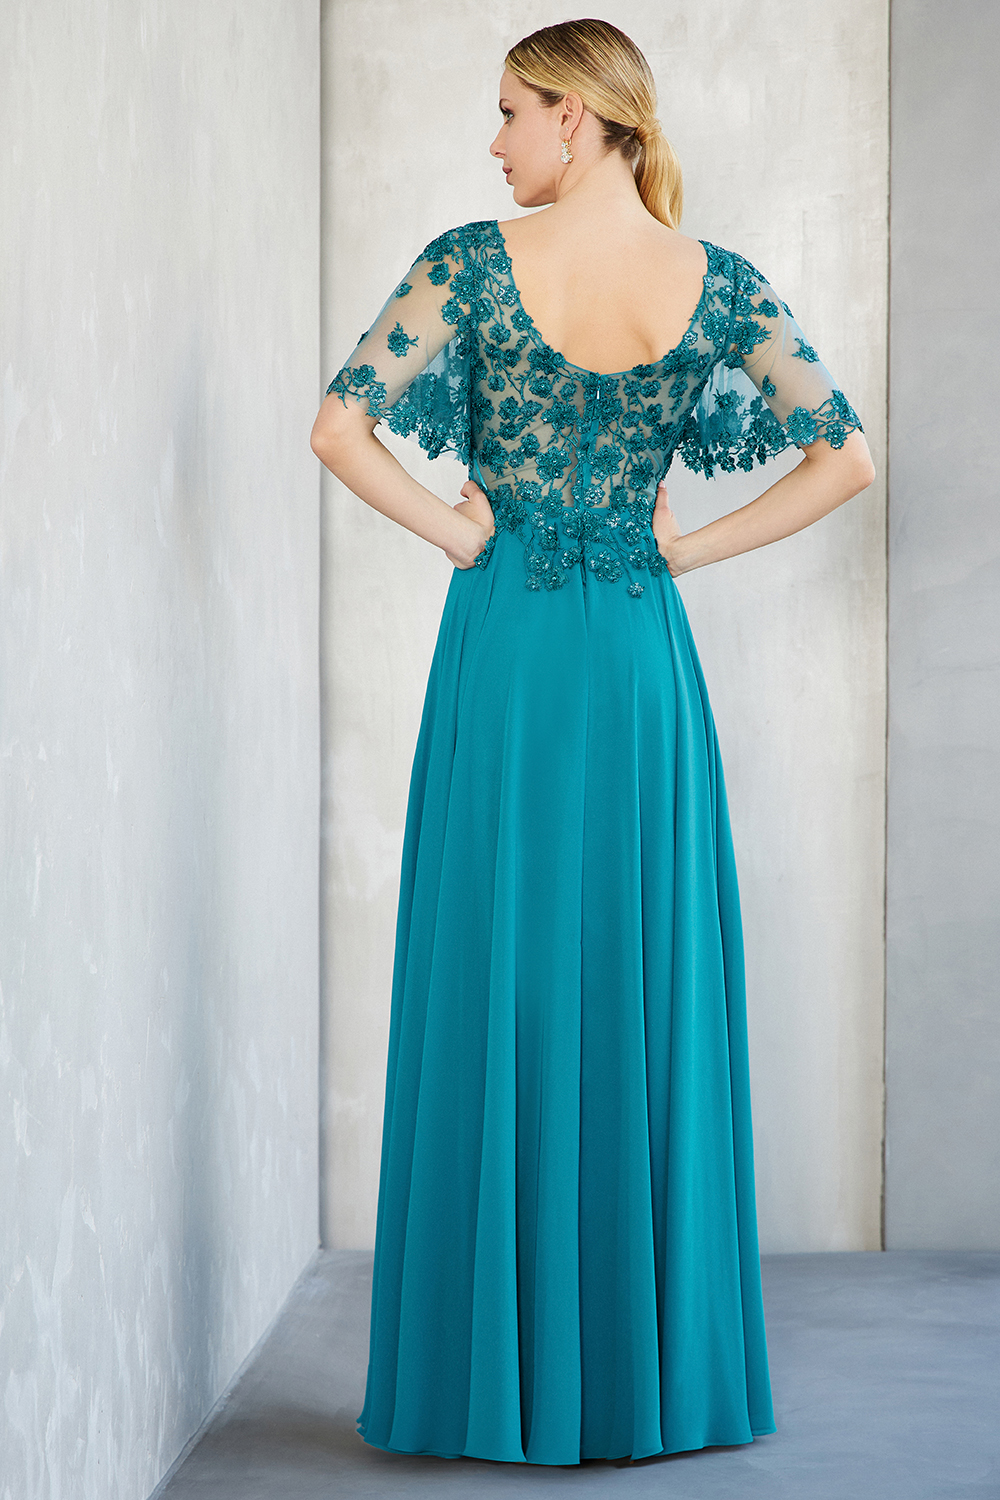 Classic Dresses / Long evening chiffon dress with lace top and long sleeves for the mother of the bride